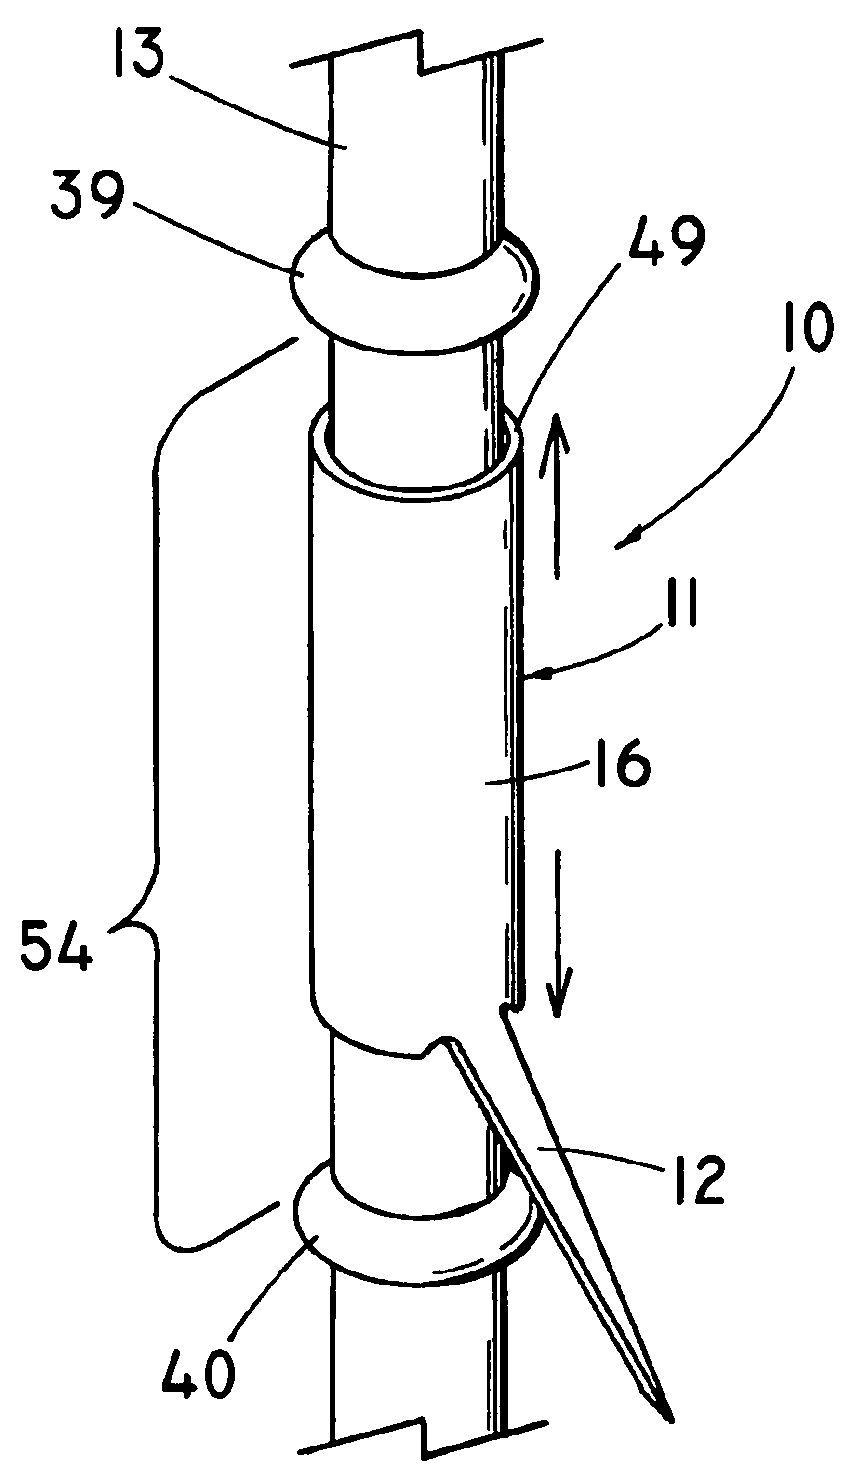 Anchoring barb for attachment to a medical prosthesis